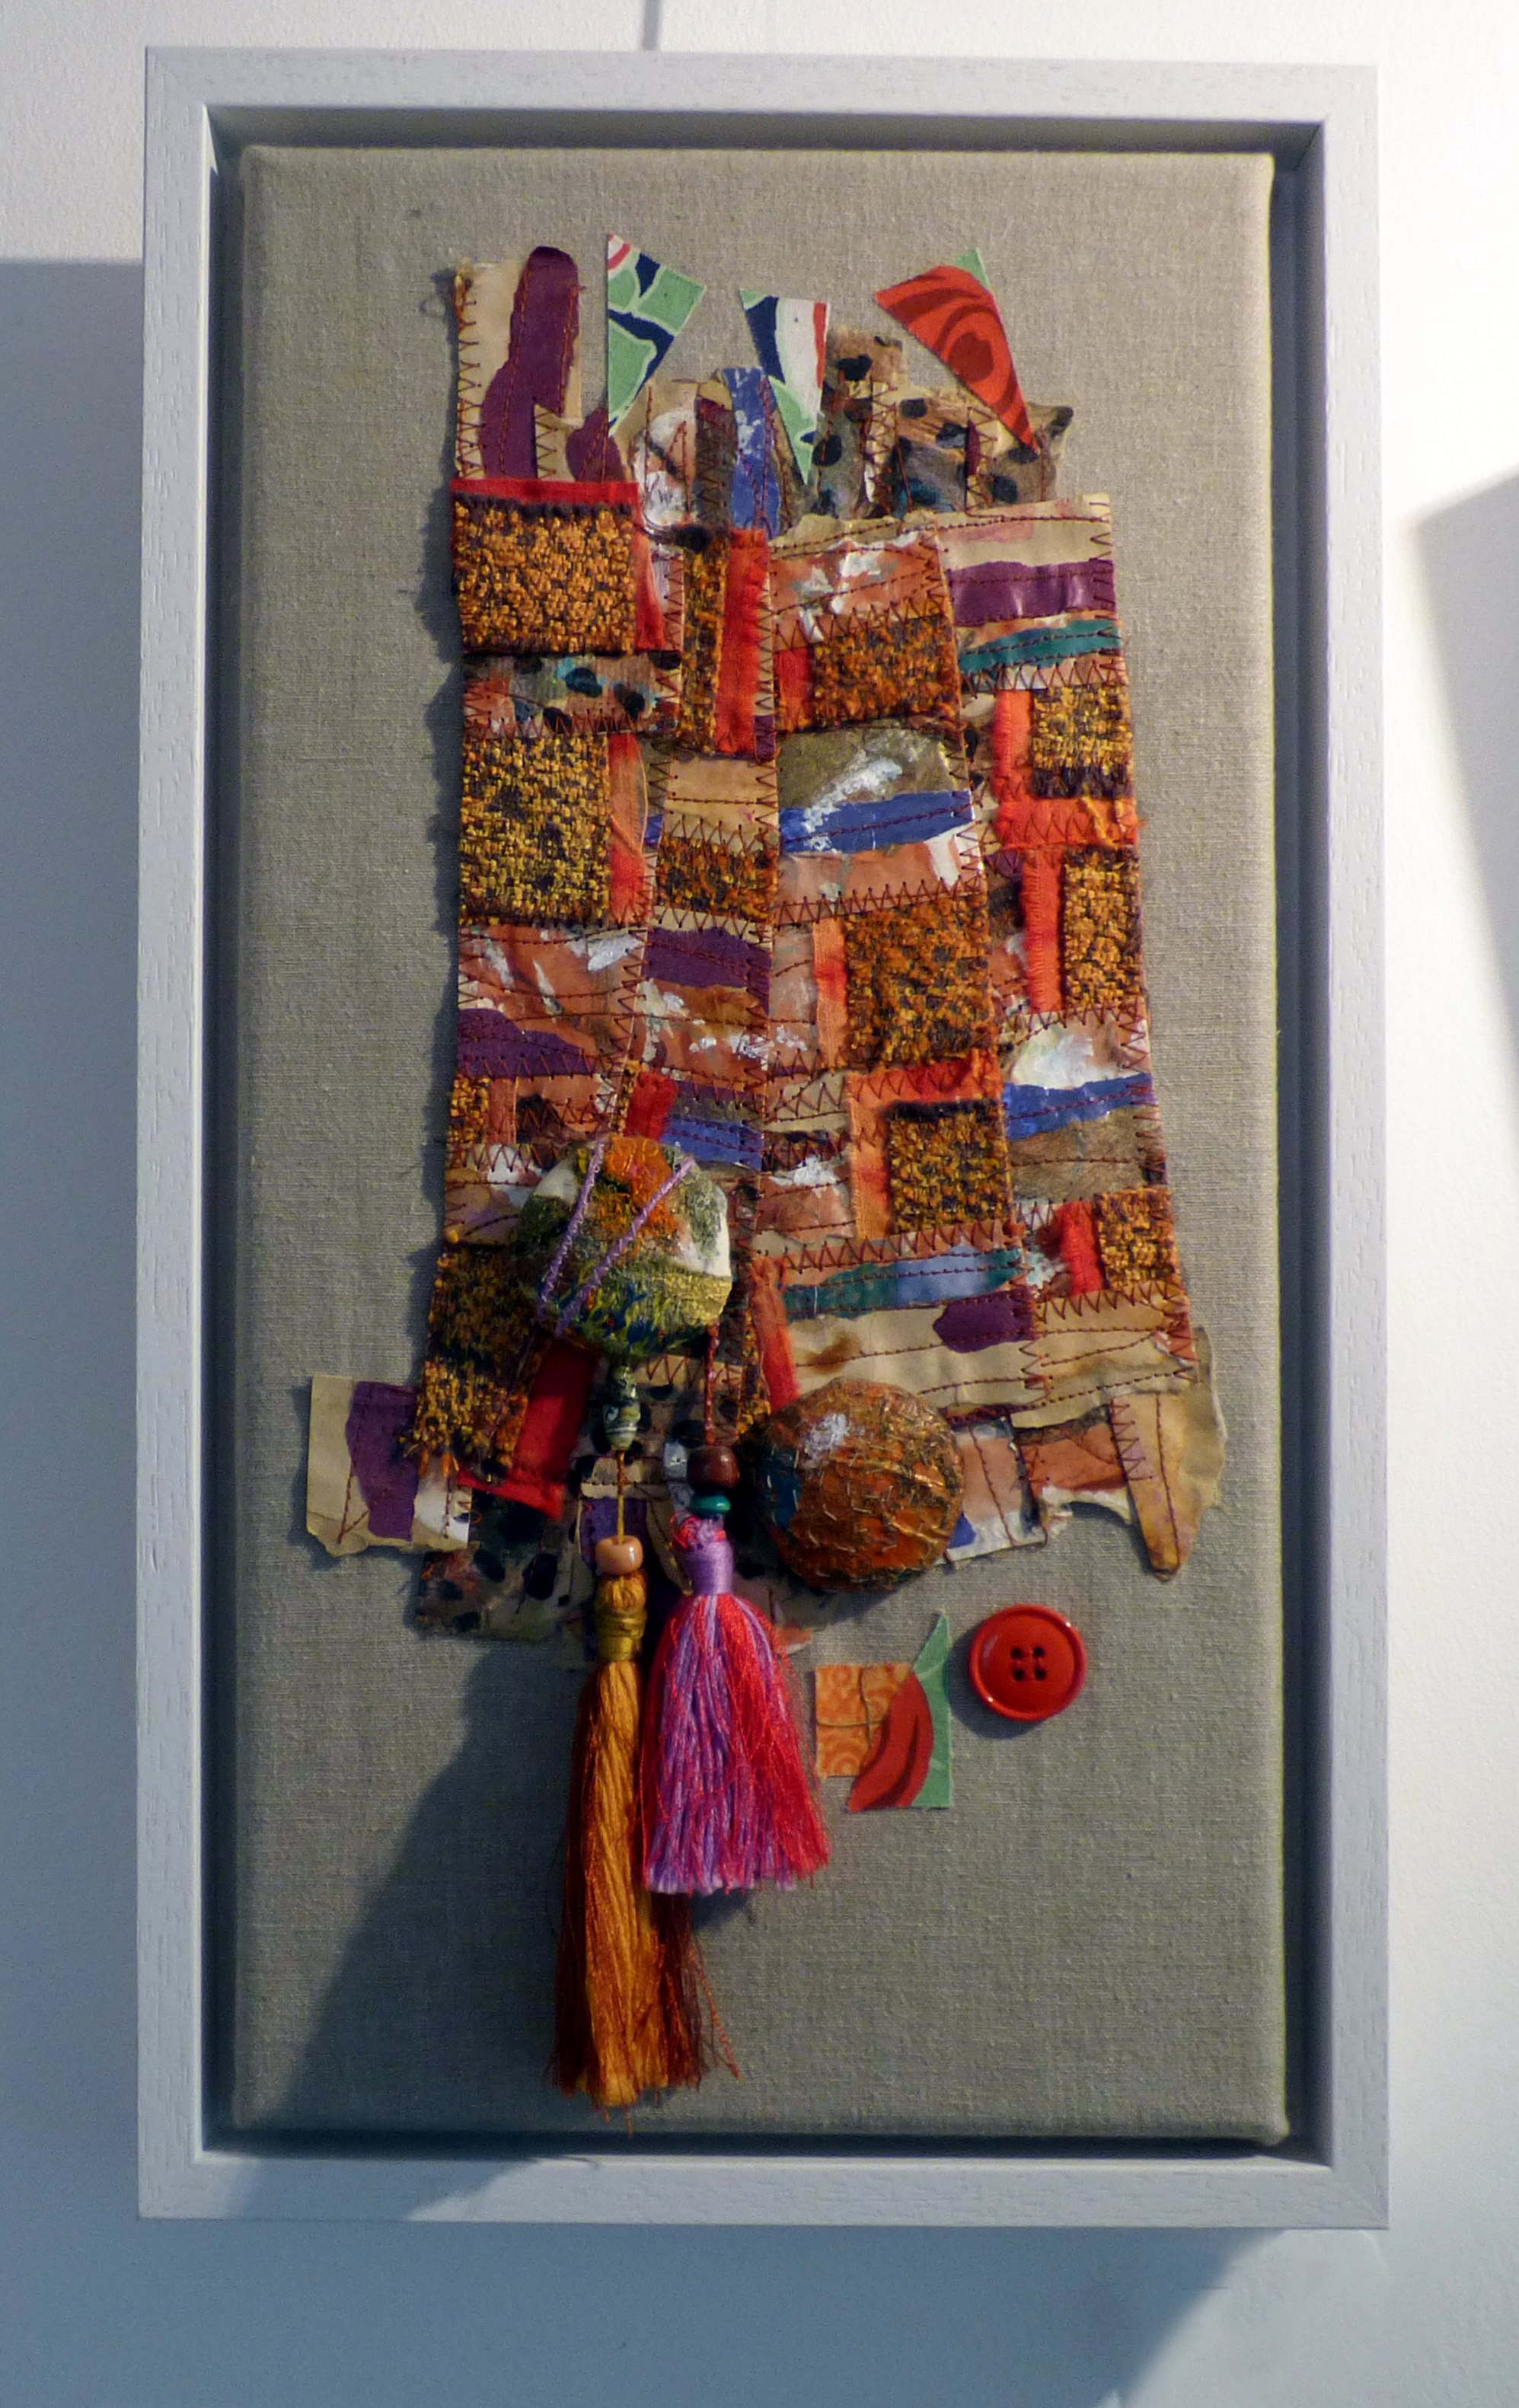 SPICE by Sue Boardman at Inside the Envelope exhibition, Ness Gardens, July 2017